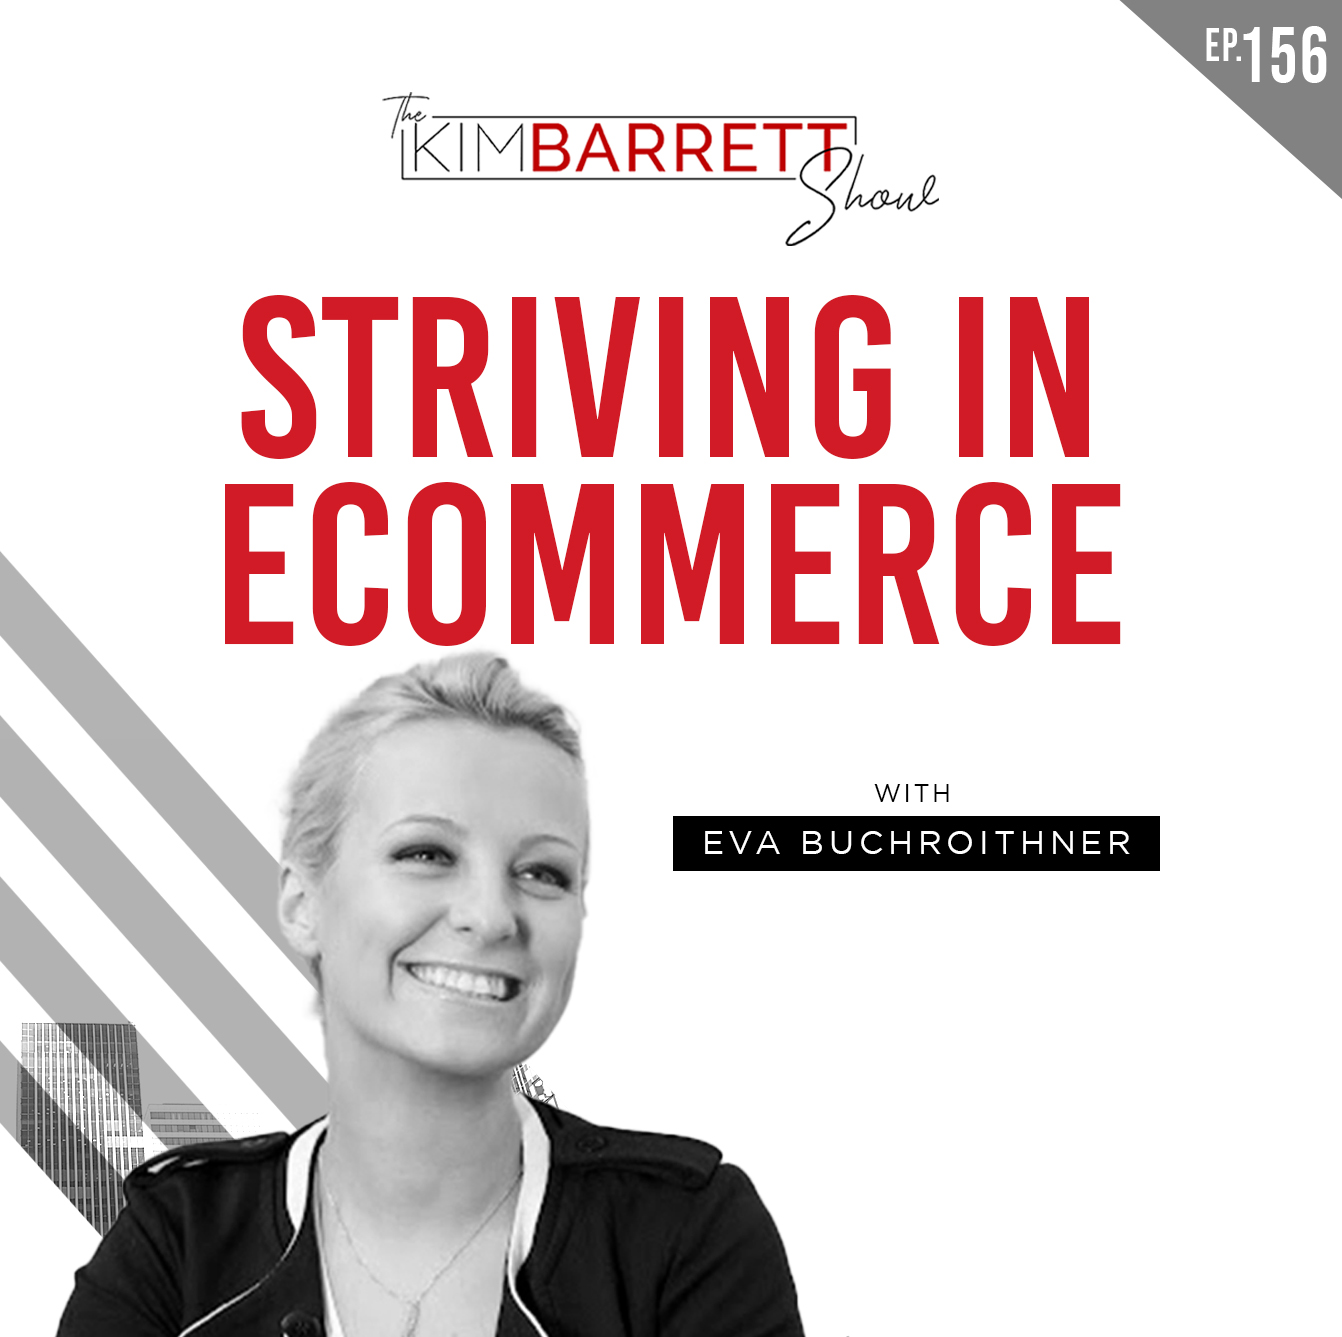 Striving In Ecommerce with Eva Buchroithner